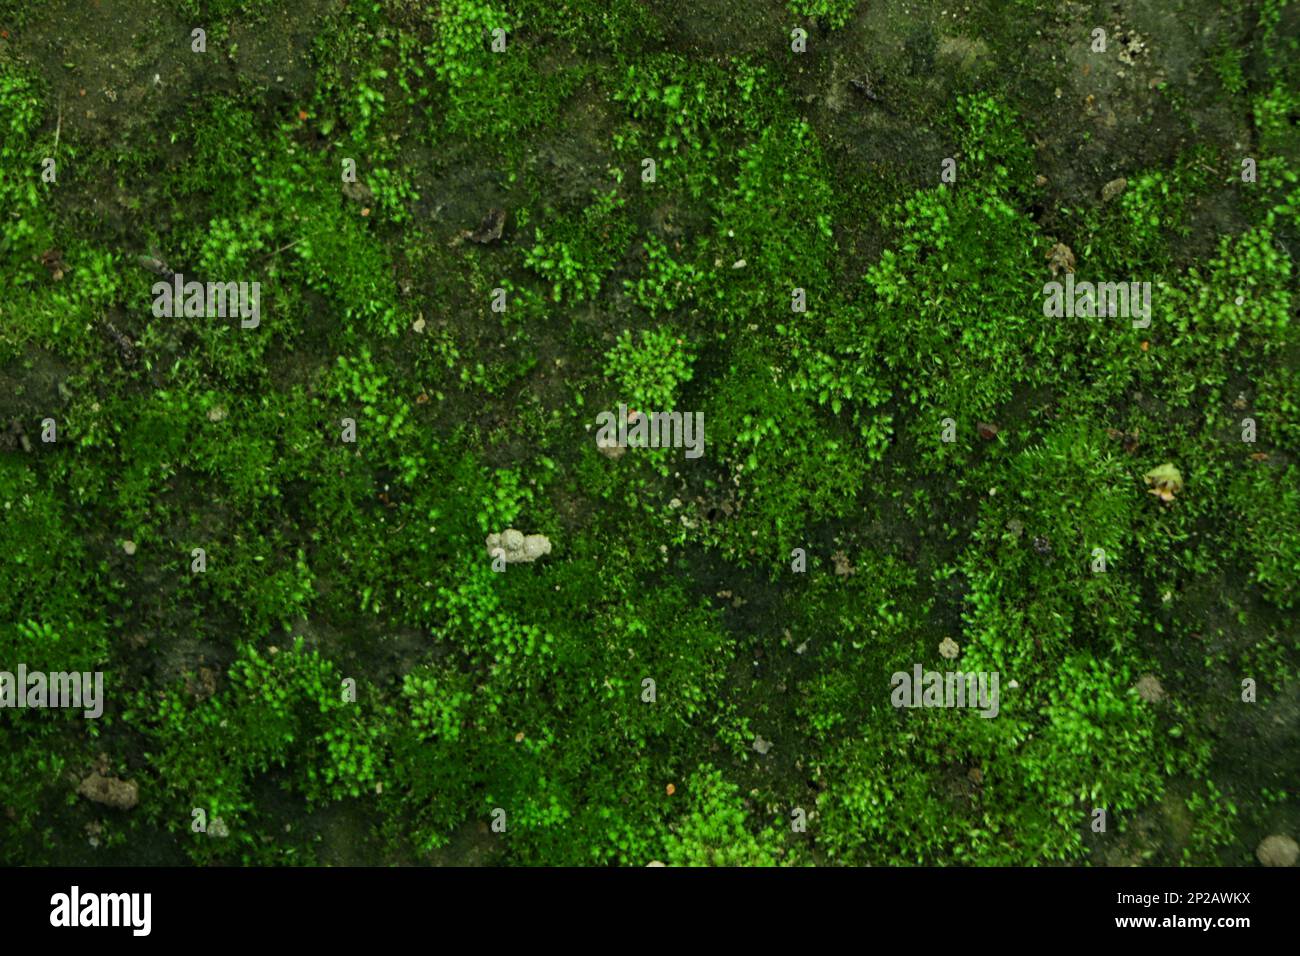 Integrity of the forest, national park. Beautiful green moss on the floor, moss close-up, macro. Beautiful background of moss with sunlight Stock Photo